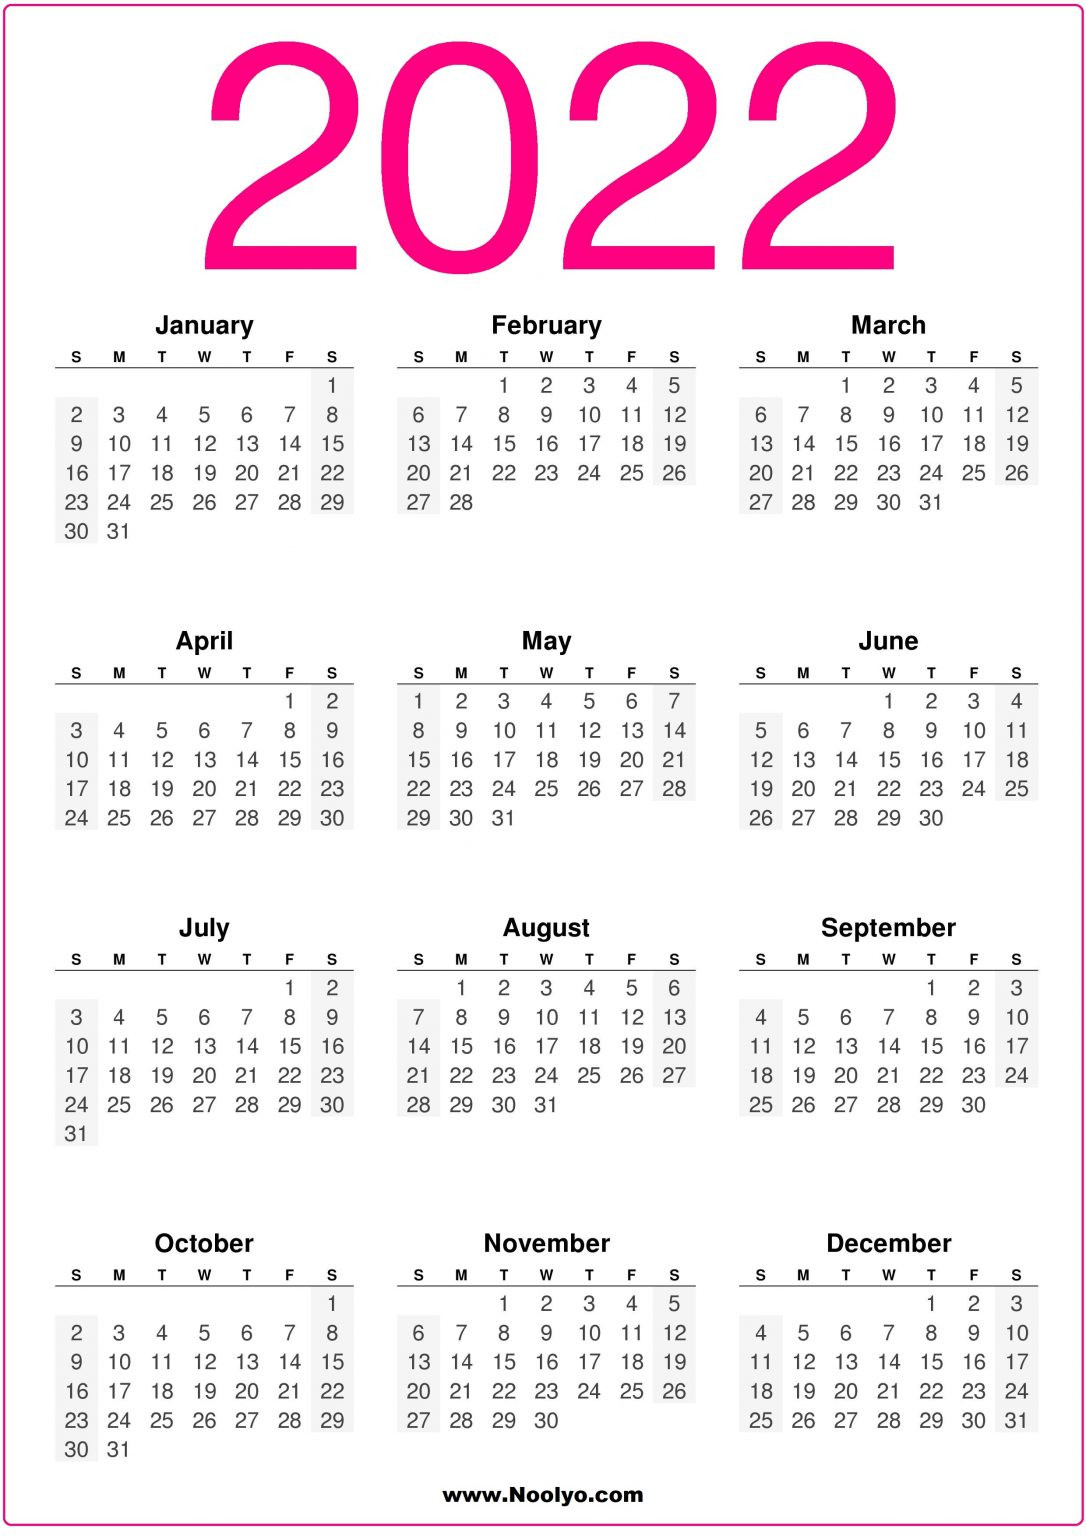 A4 Size 2022 Calendars Printable Free Vertical - Noolyo-2022 Calendar With Holidays Uk